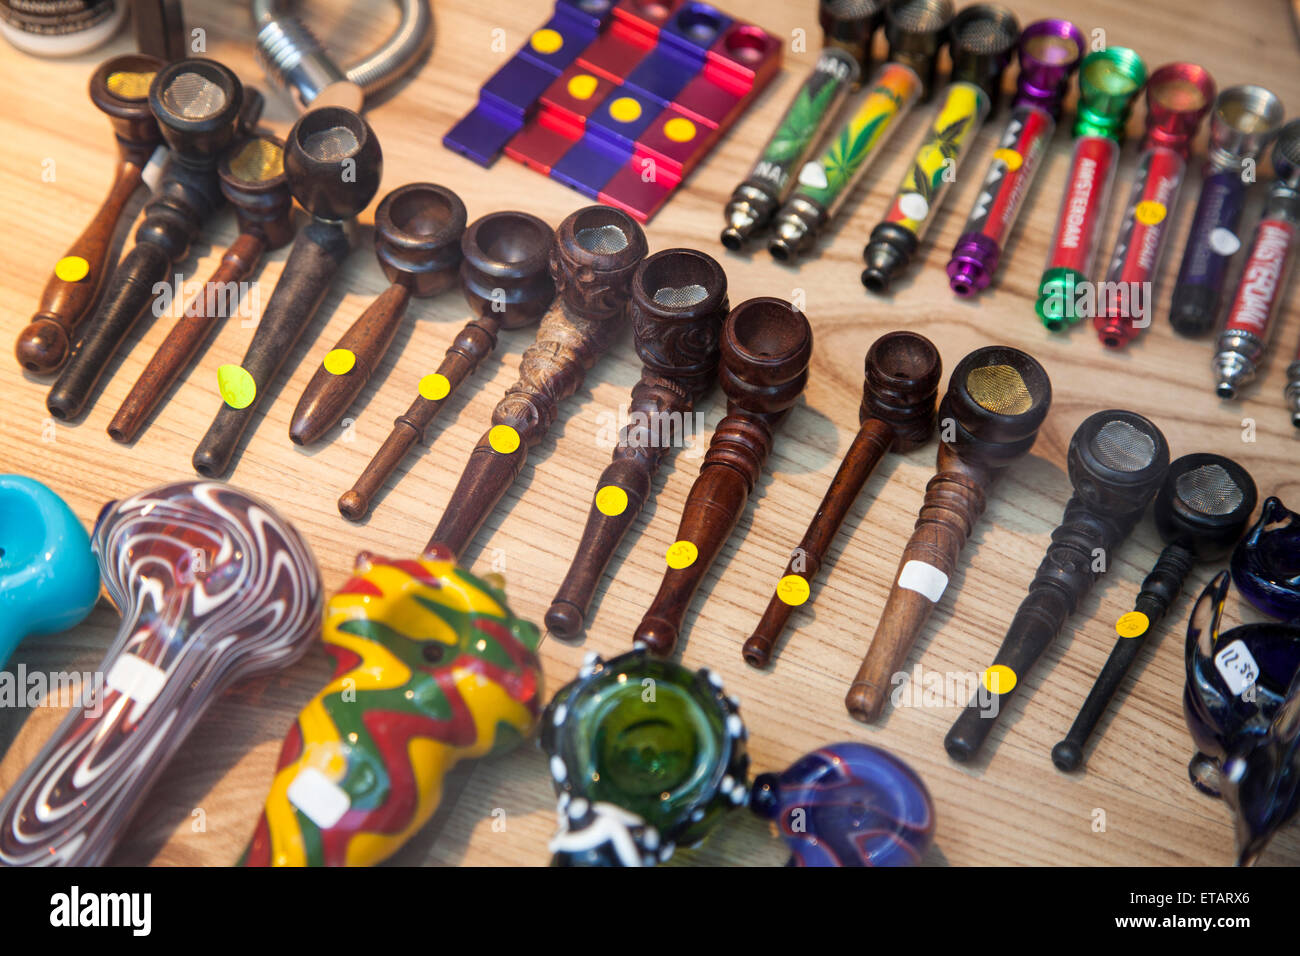 many different sorts of hash pipes for sale in amsterdam shop Stock Photo